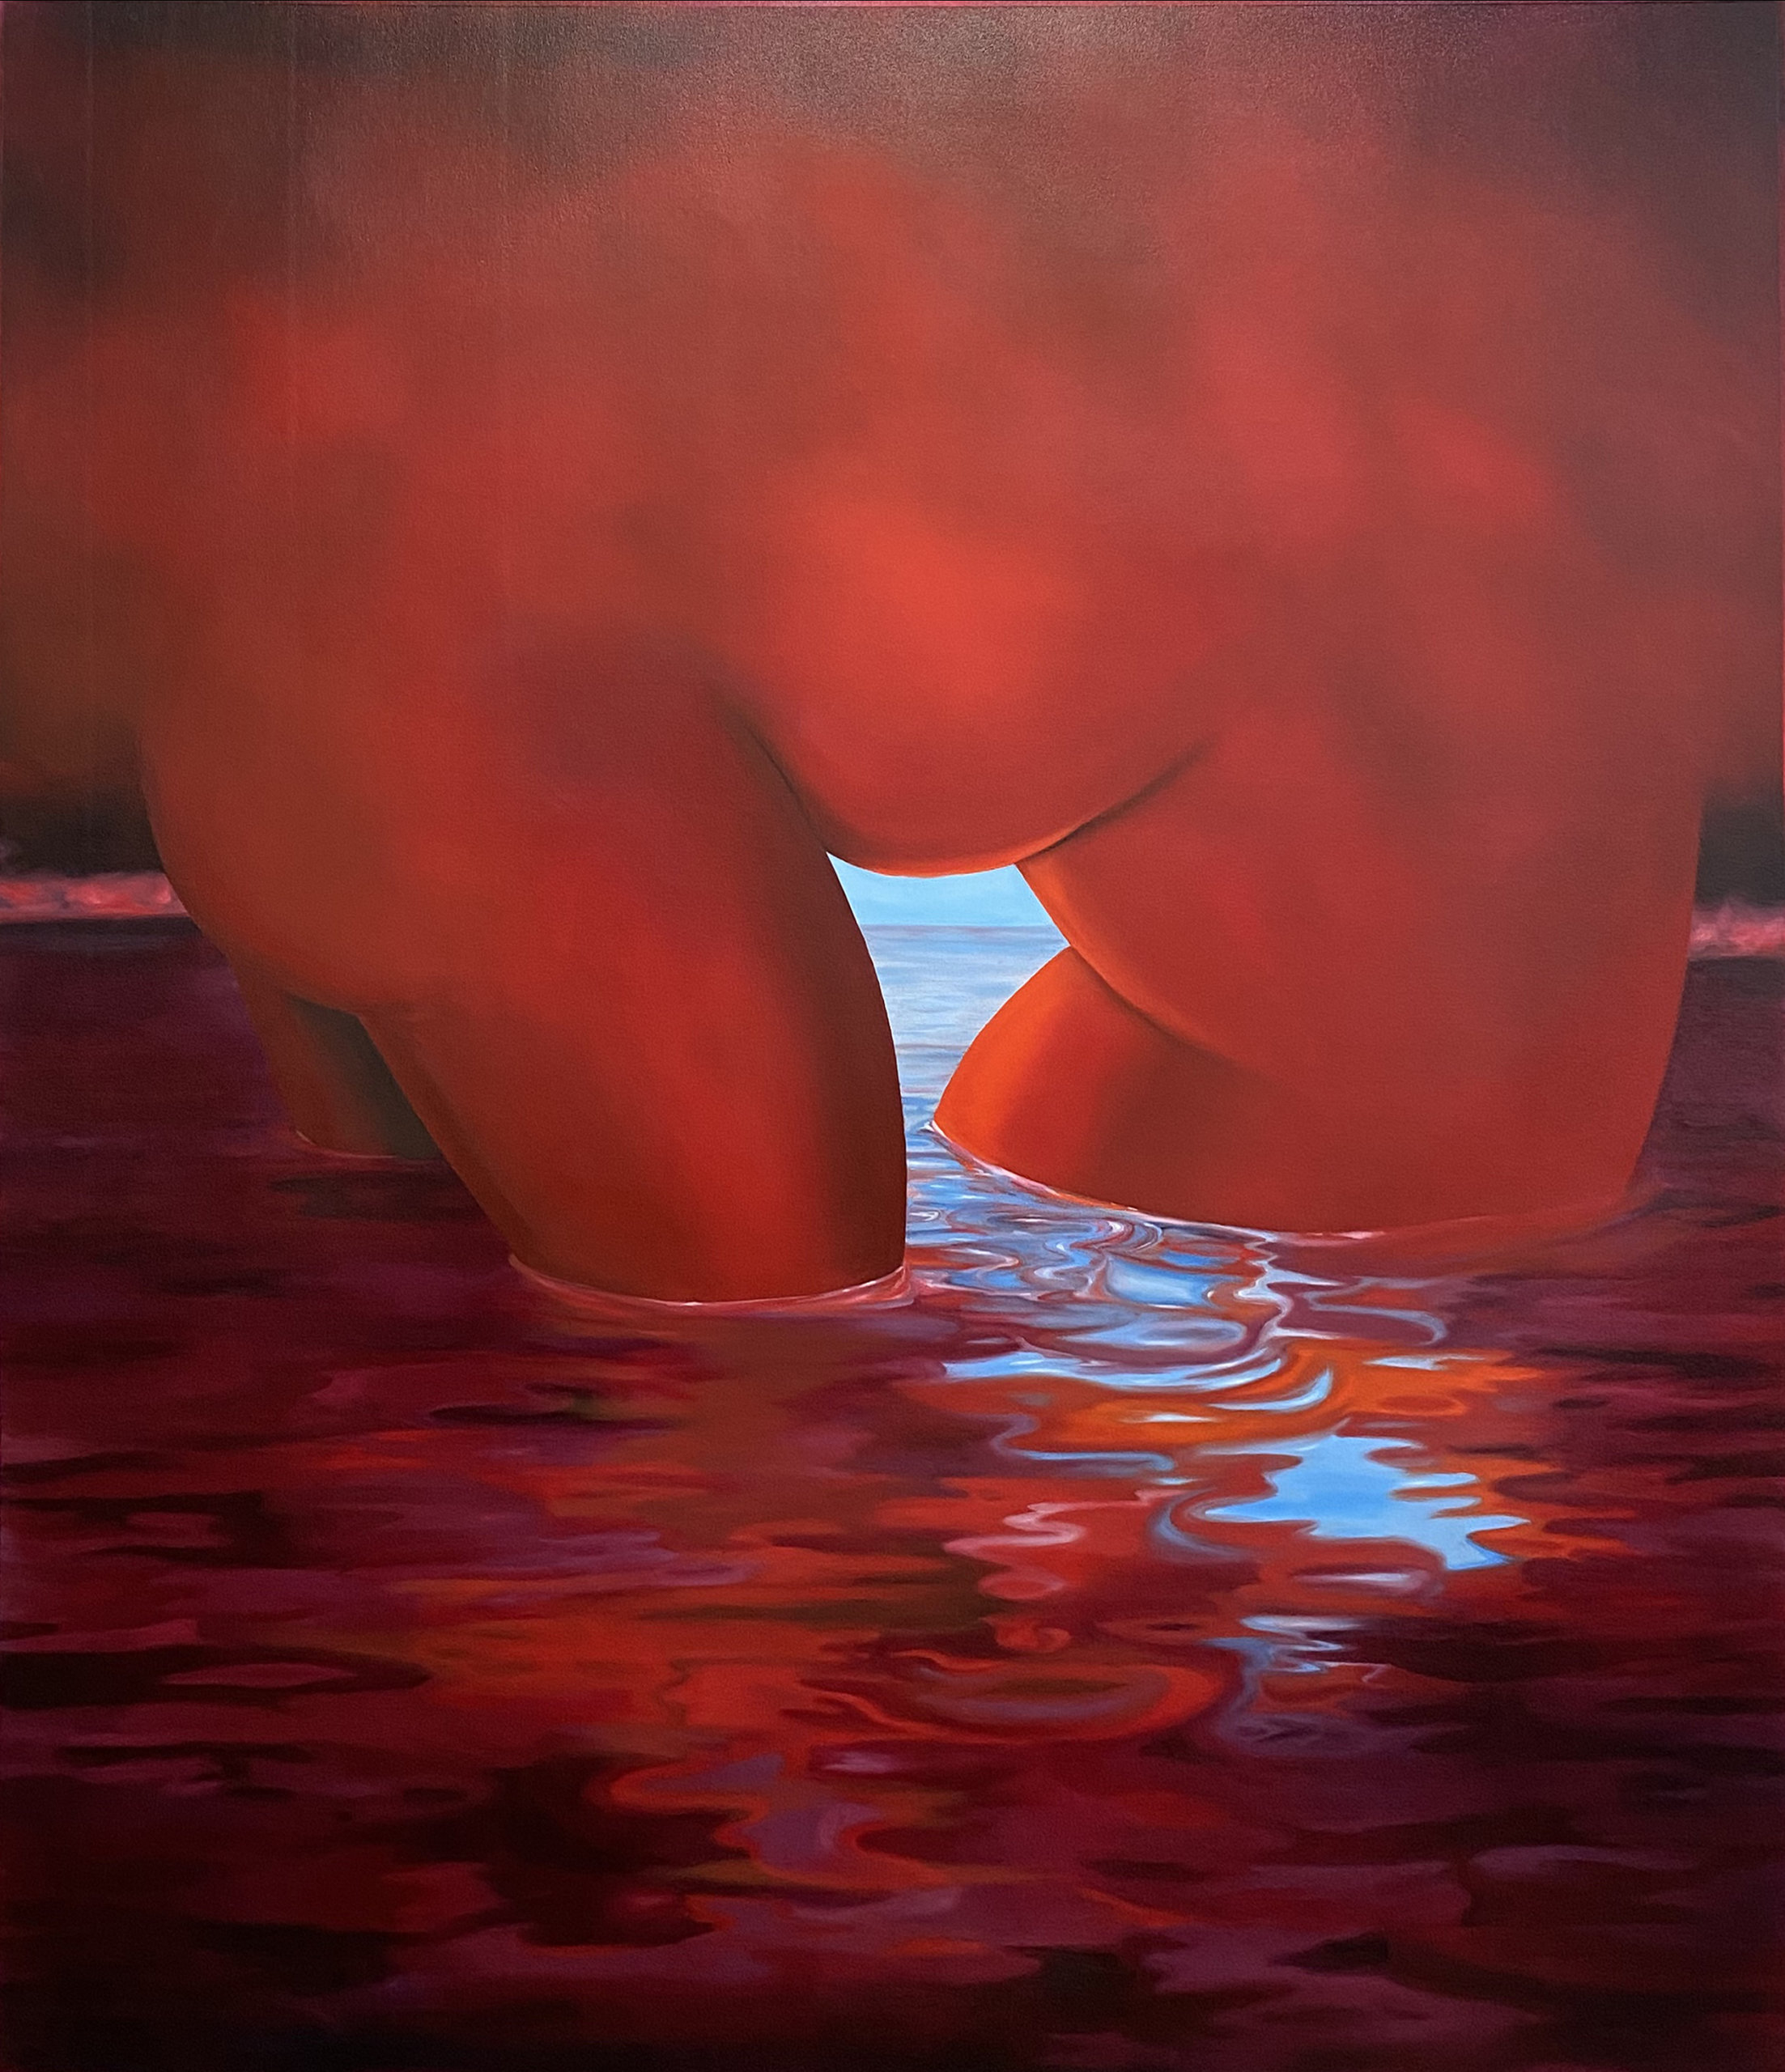 Brittney Leeanne Williams A Red Baptism and a Red Drowning, 2019 oil on canvas 58 x 50 in. (147.3 x 127 cm.)